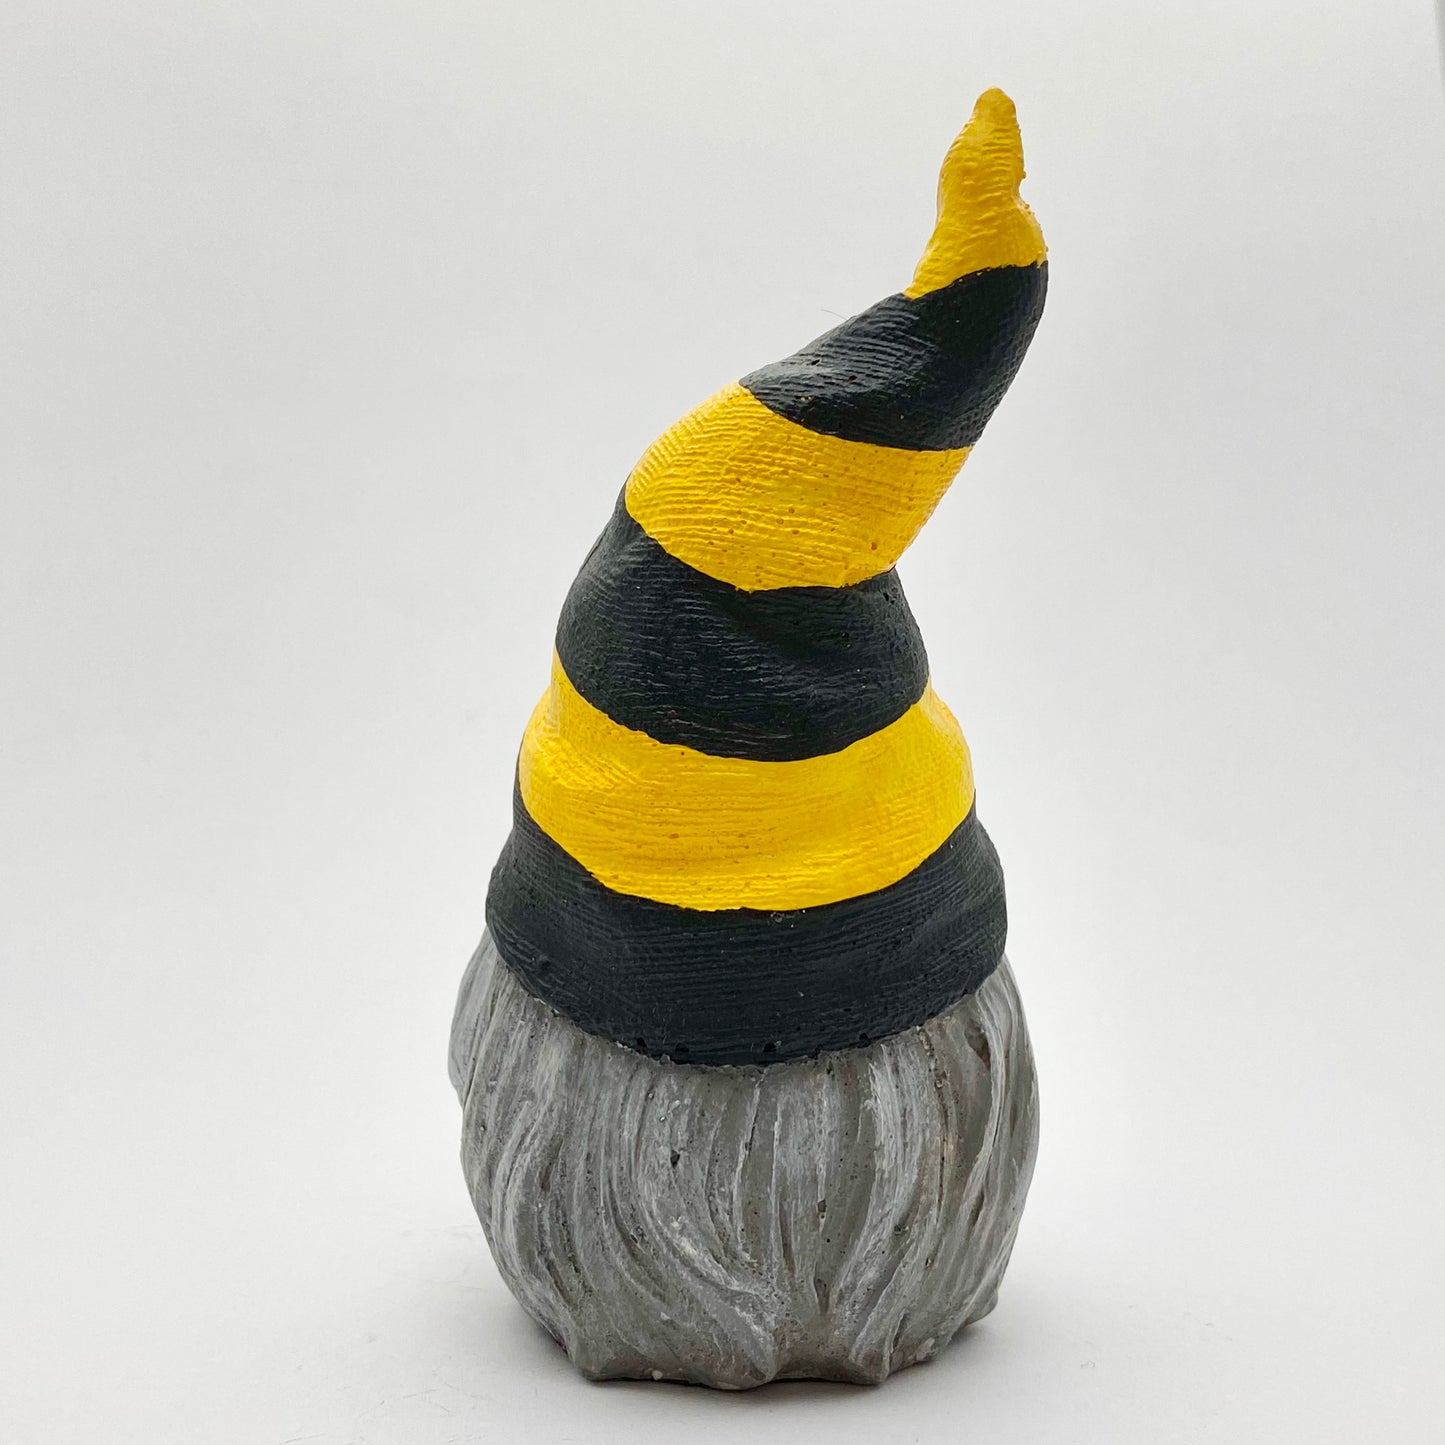 Hand painted Gonk statue with yellow and black striped Bee Hat